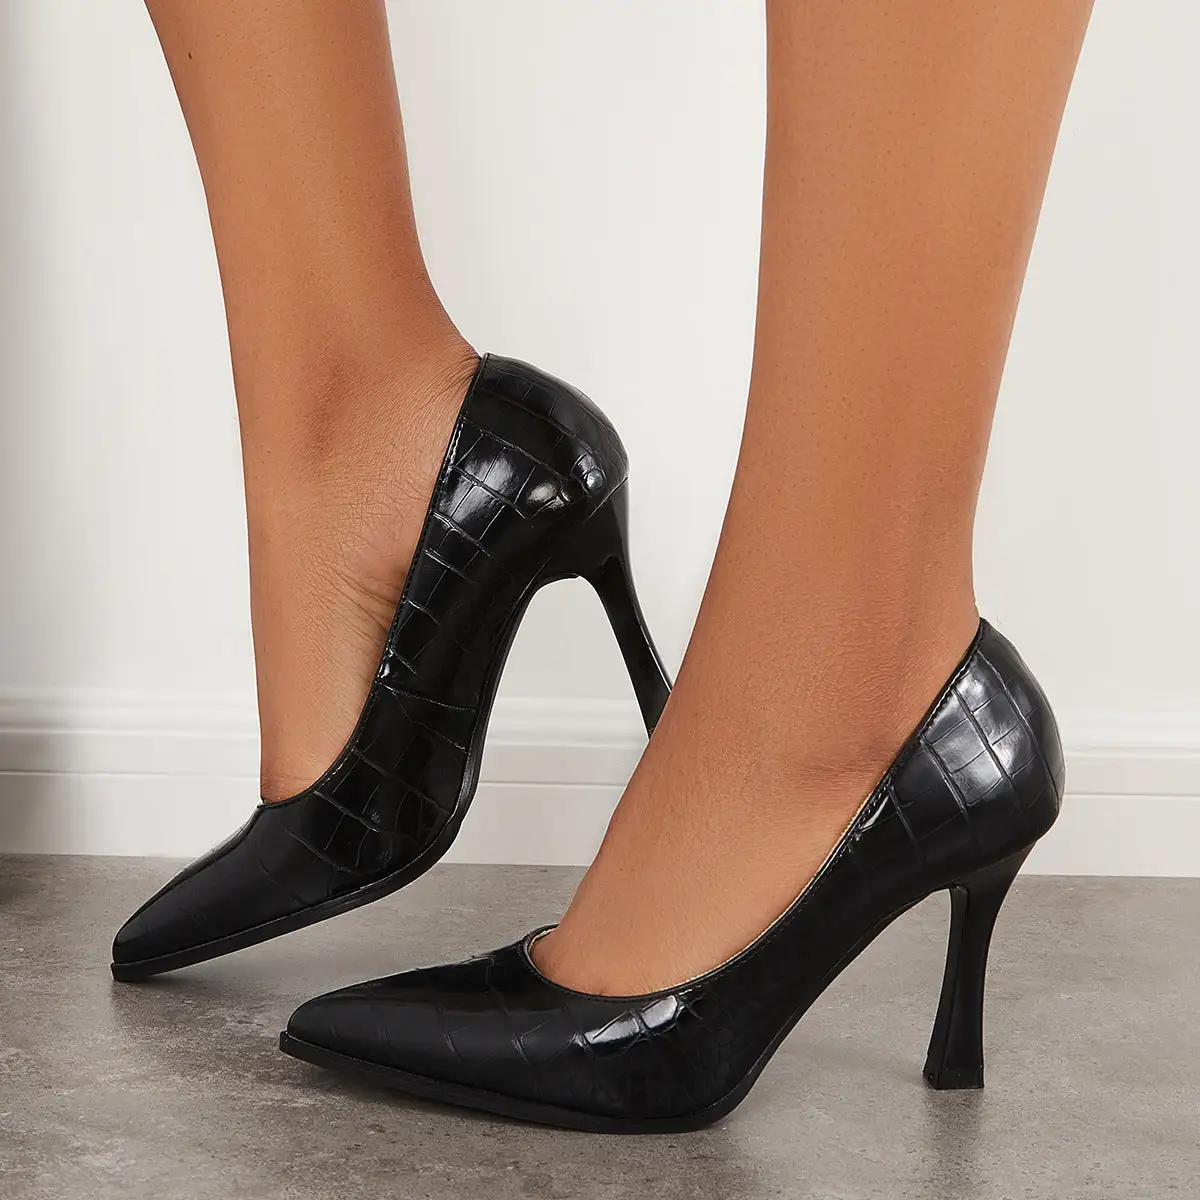 Classic Patent Leather Pointed Toe High Heel Dress Pumps Shoes